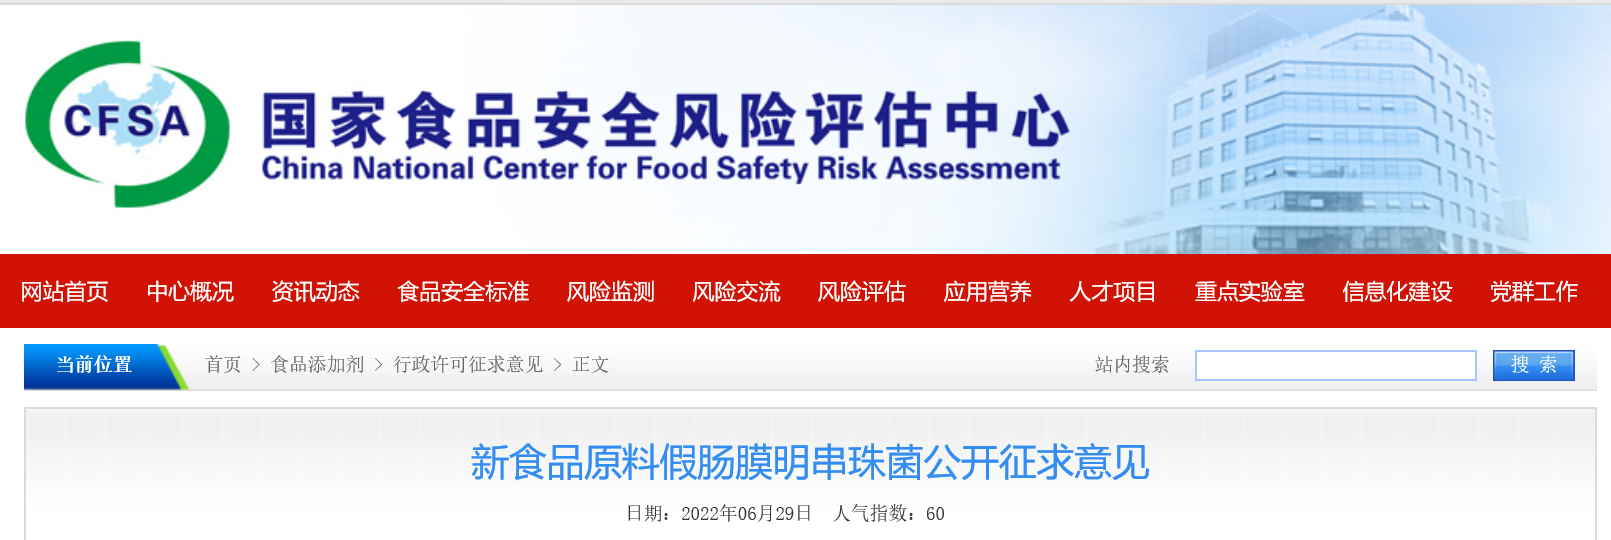 China,Food,CFSA,New,Material,Comment,Public